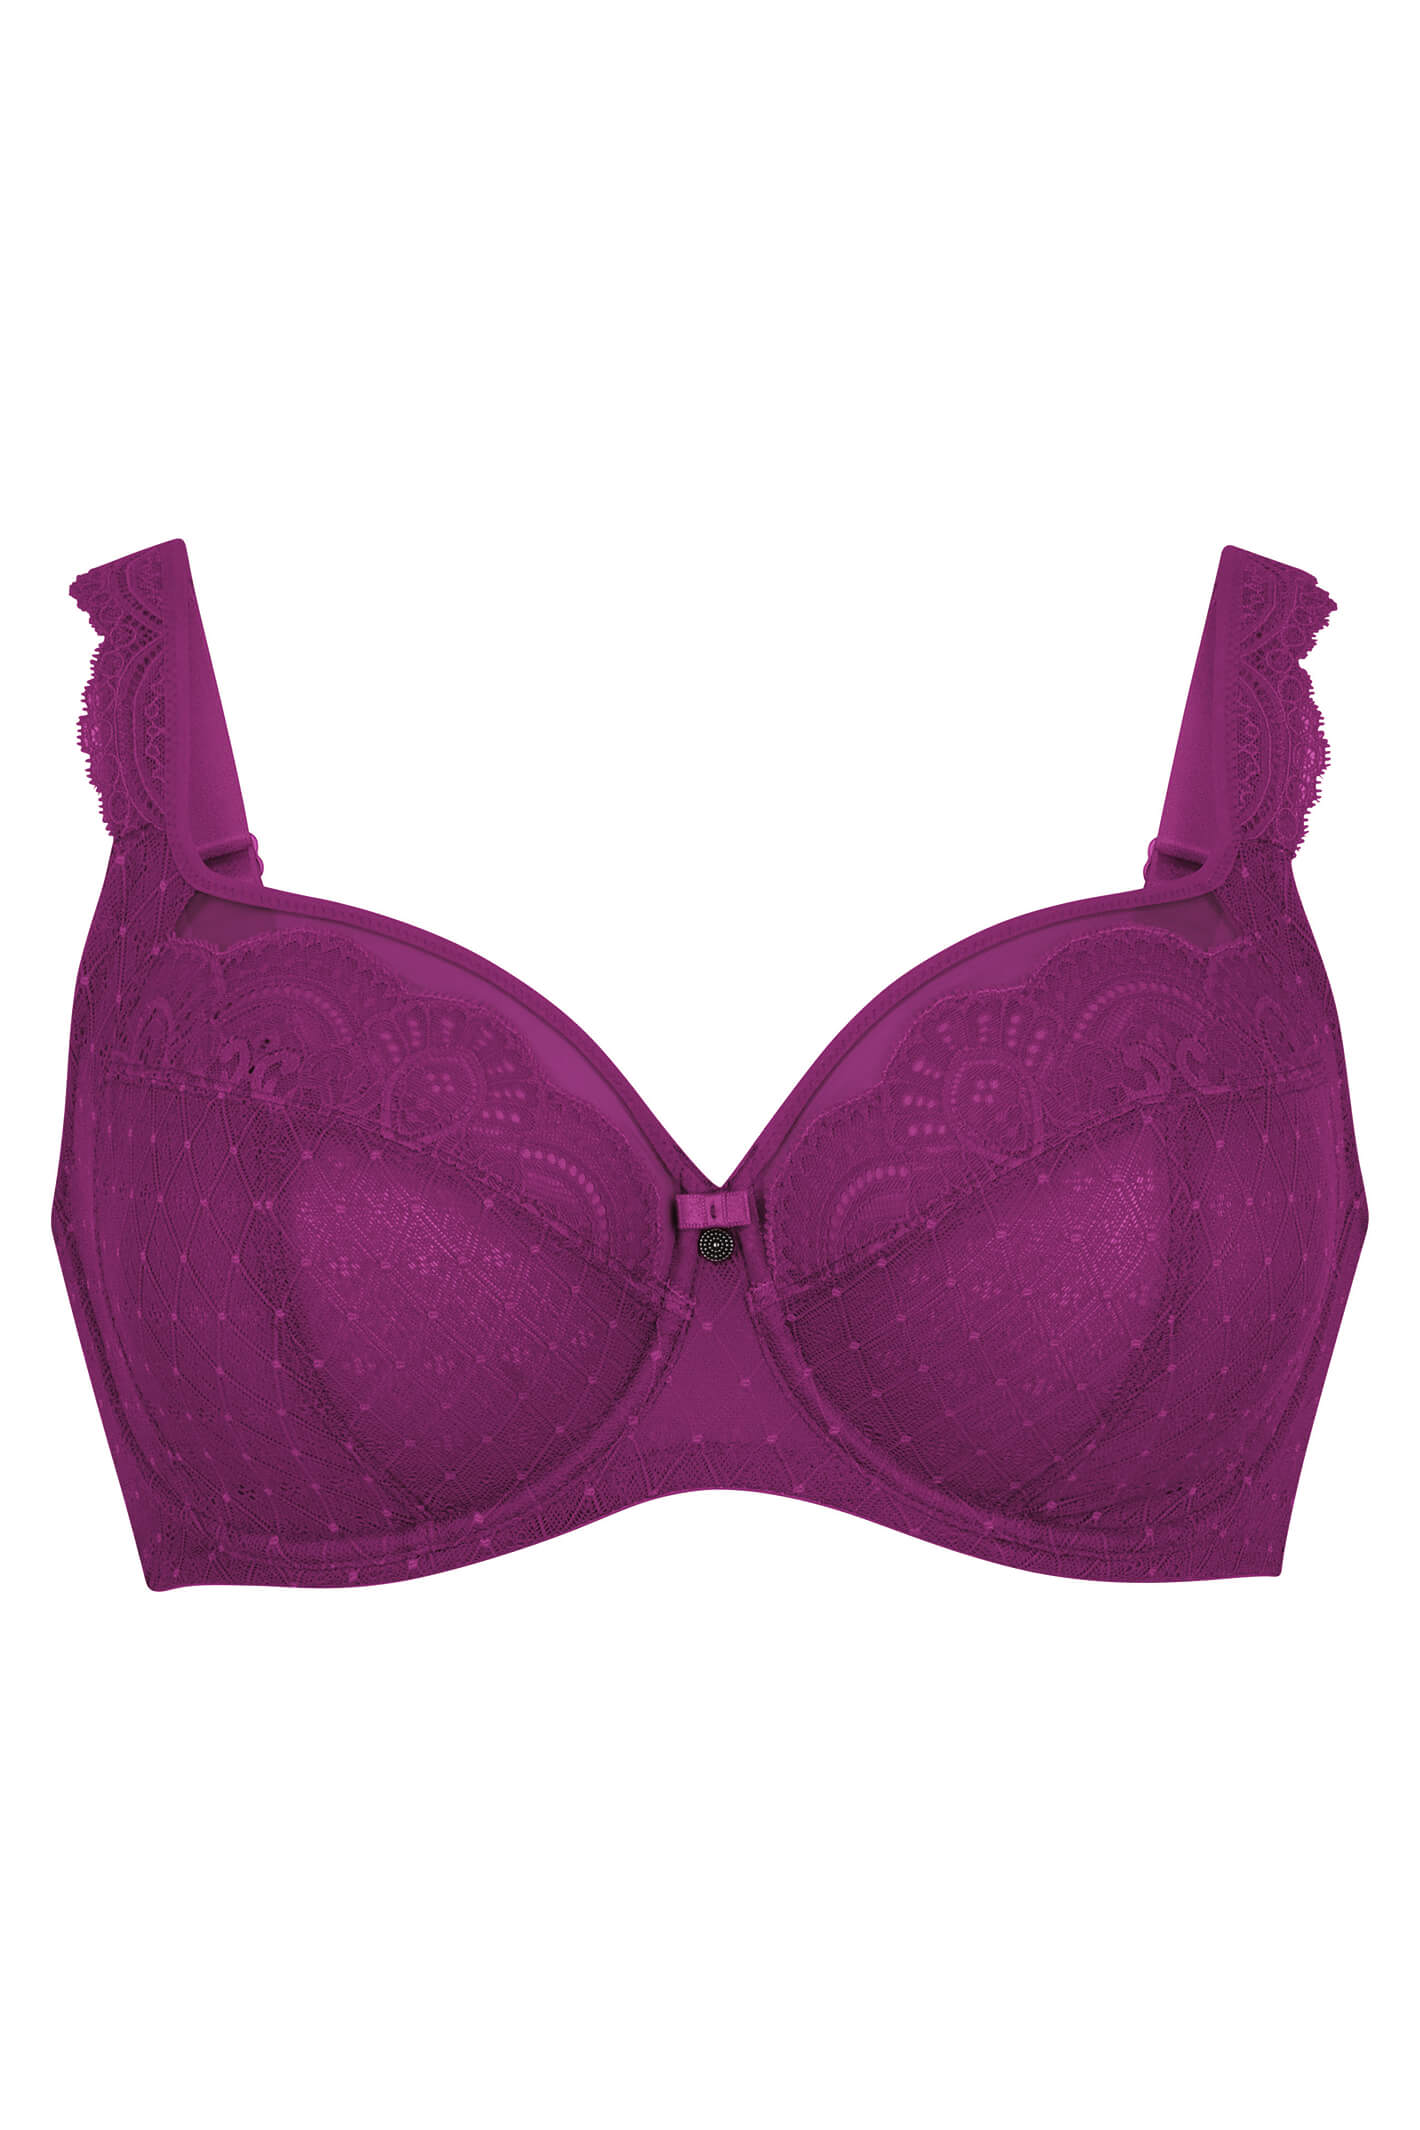 Rosa Faia Selma 5635-252 Women's Purple Wine Underwired Full Cup Bra 40J at   Women's Clothing store